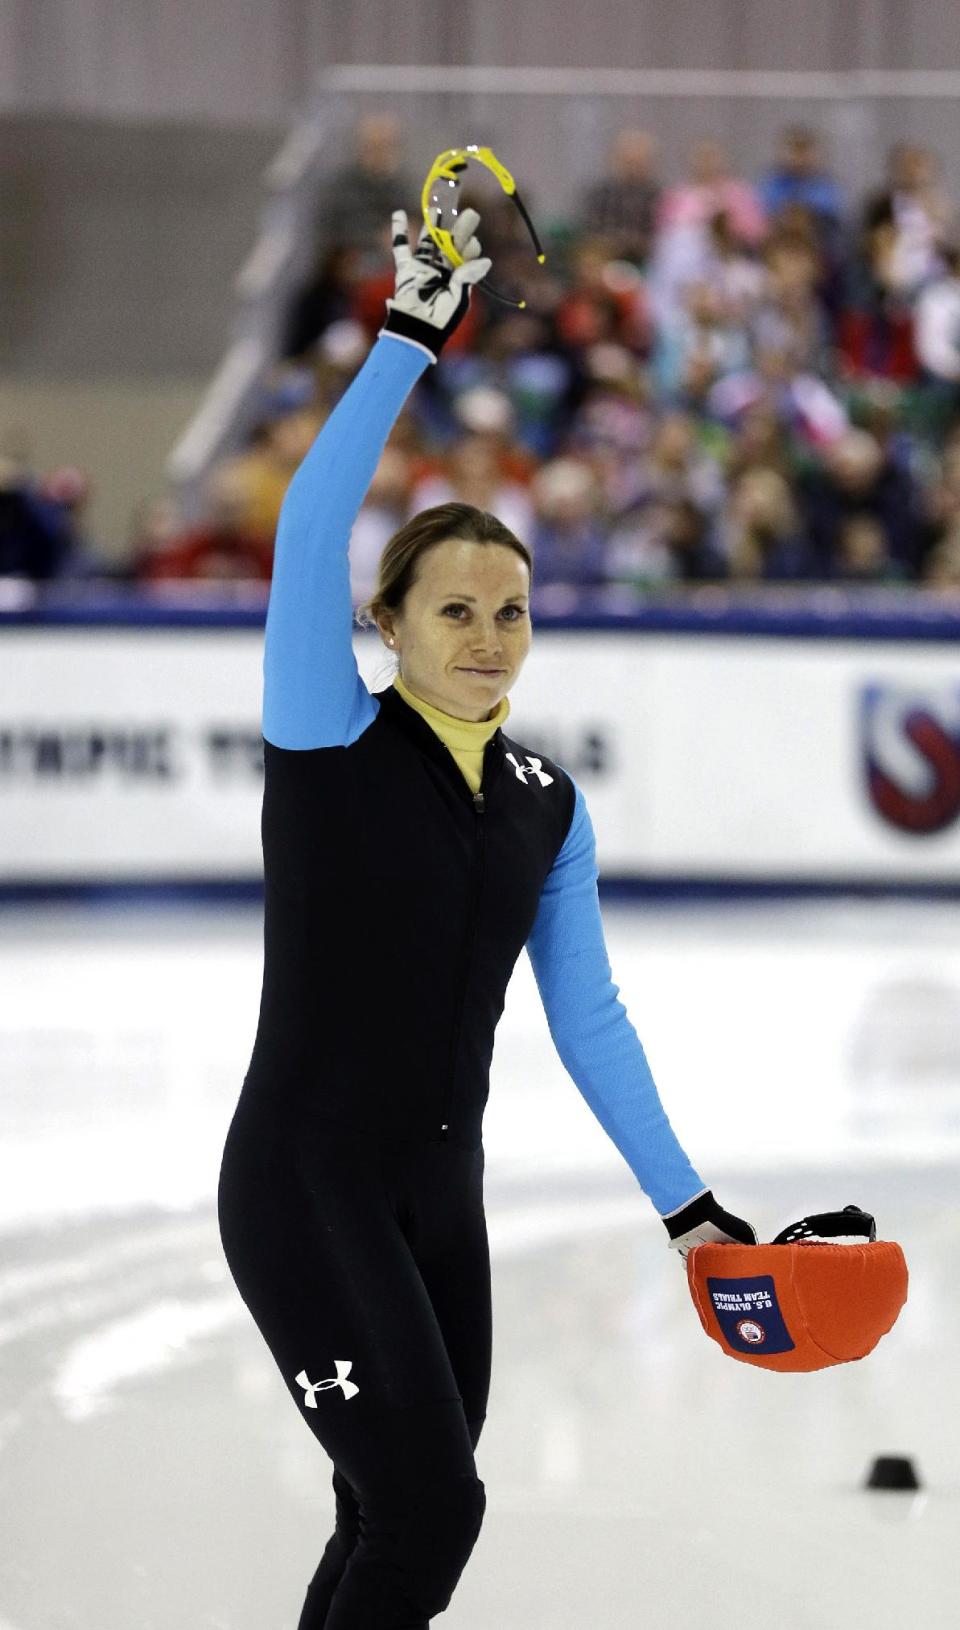 Jessica Smith reacts to the crowd before her race in the women's 1,500 meters during the U.S. Olympic short track speedskating trials, Friday, Jan. 3, 2014, in Kearns, Utah. (AP Photo/Rick Bowmer)